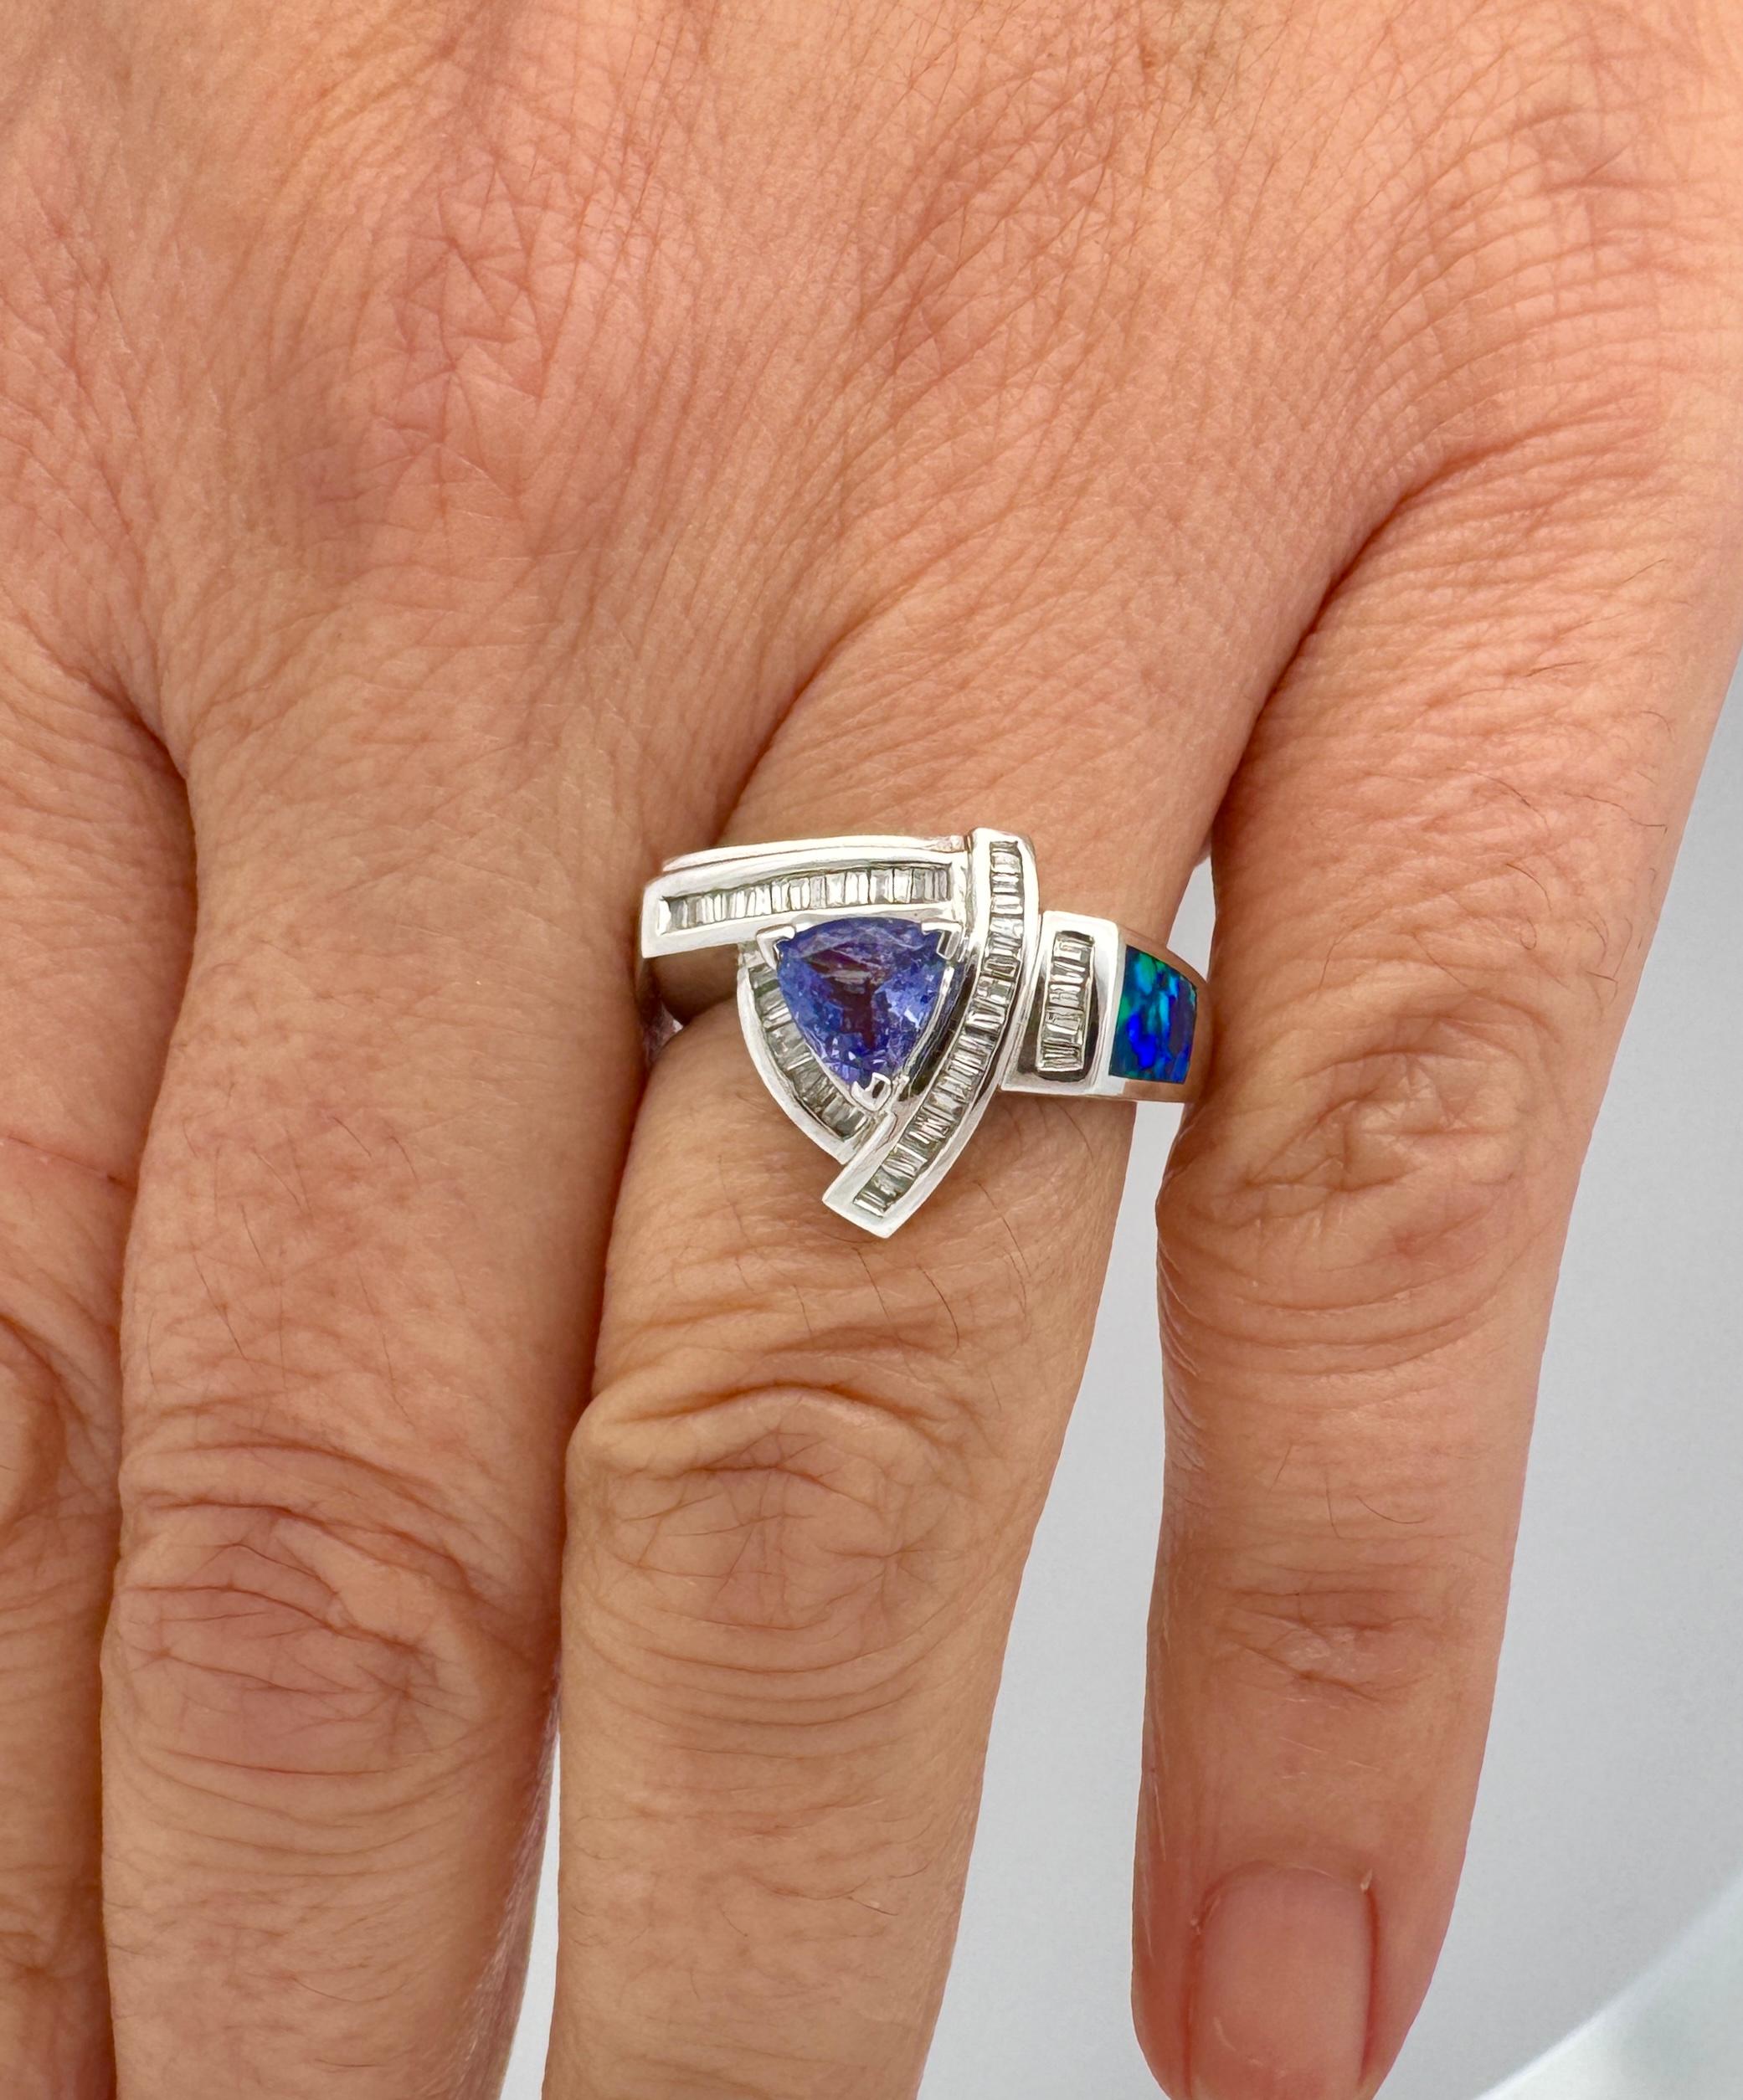 Vintage Natural Tanzanite, Inlaid Opal, and Diamond Cluster Ring in 14K Solid White Gold. Prong and tension set. 

Details: 
- Tanzanite: 0.55 Carats, Trillion cut 
- Diamond: 0.35 Carats, Baguette Cut 
- Opal: 1 Inlaid Opal, 6.5mm
- Ring Weight: